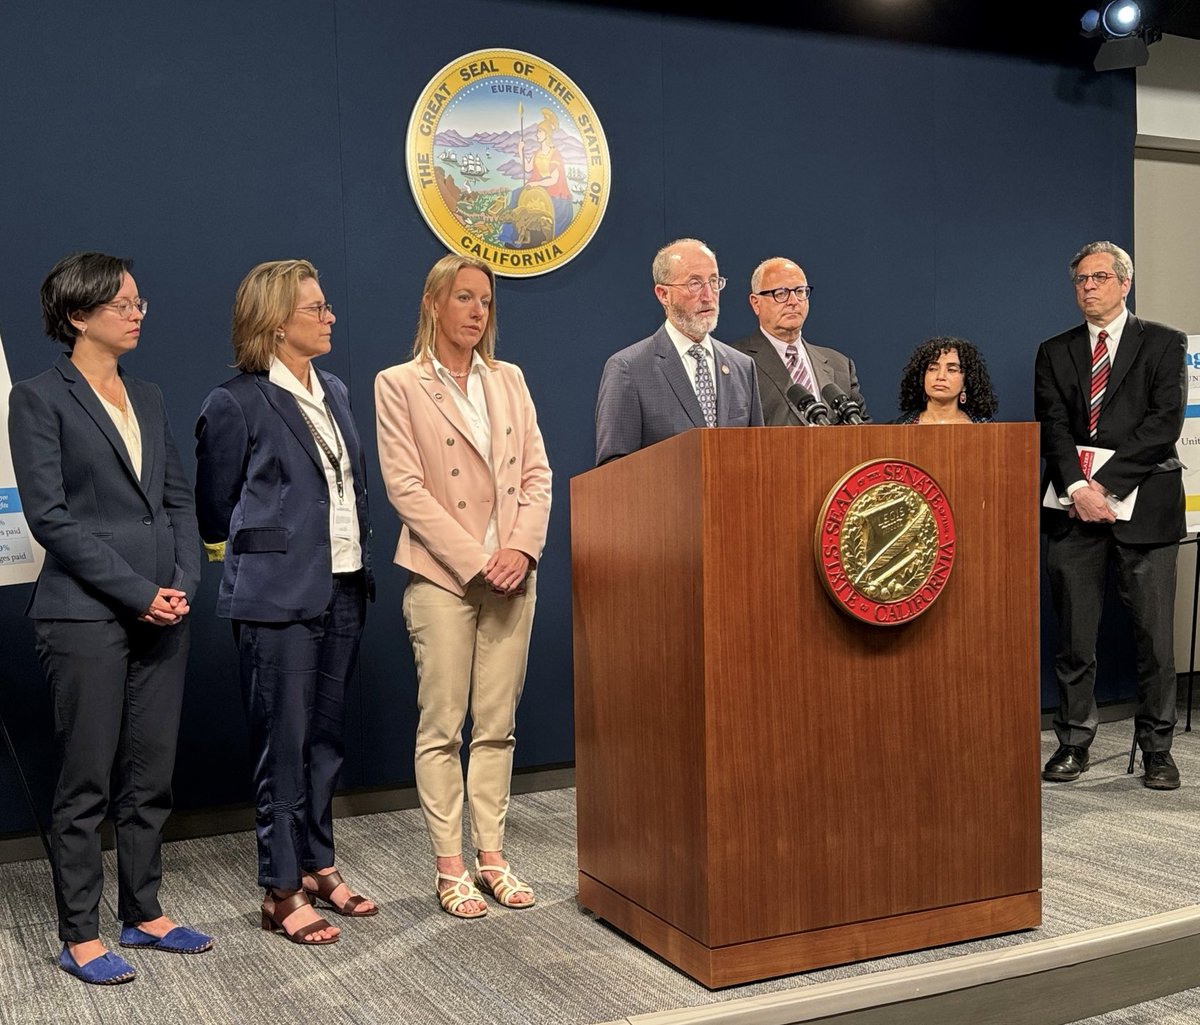 Thank you to @SenBlakespear @awsaville, Laura Rearwin Ward, publisher of @OVN, @lknobel, @Nadia8 & @stevenwaldman for lending their powerful voices for journalism & supporting my bill, SB 1327, which seeks to revive newsrooms in CA. A strong democracy needs a thriving news media.